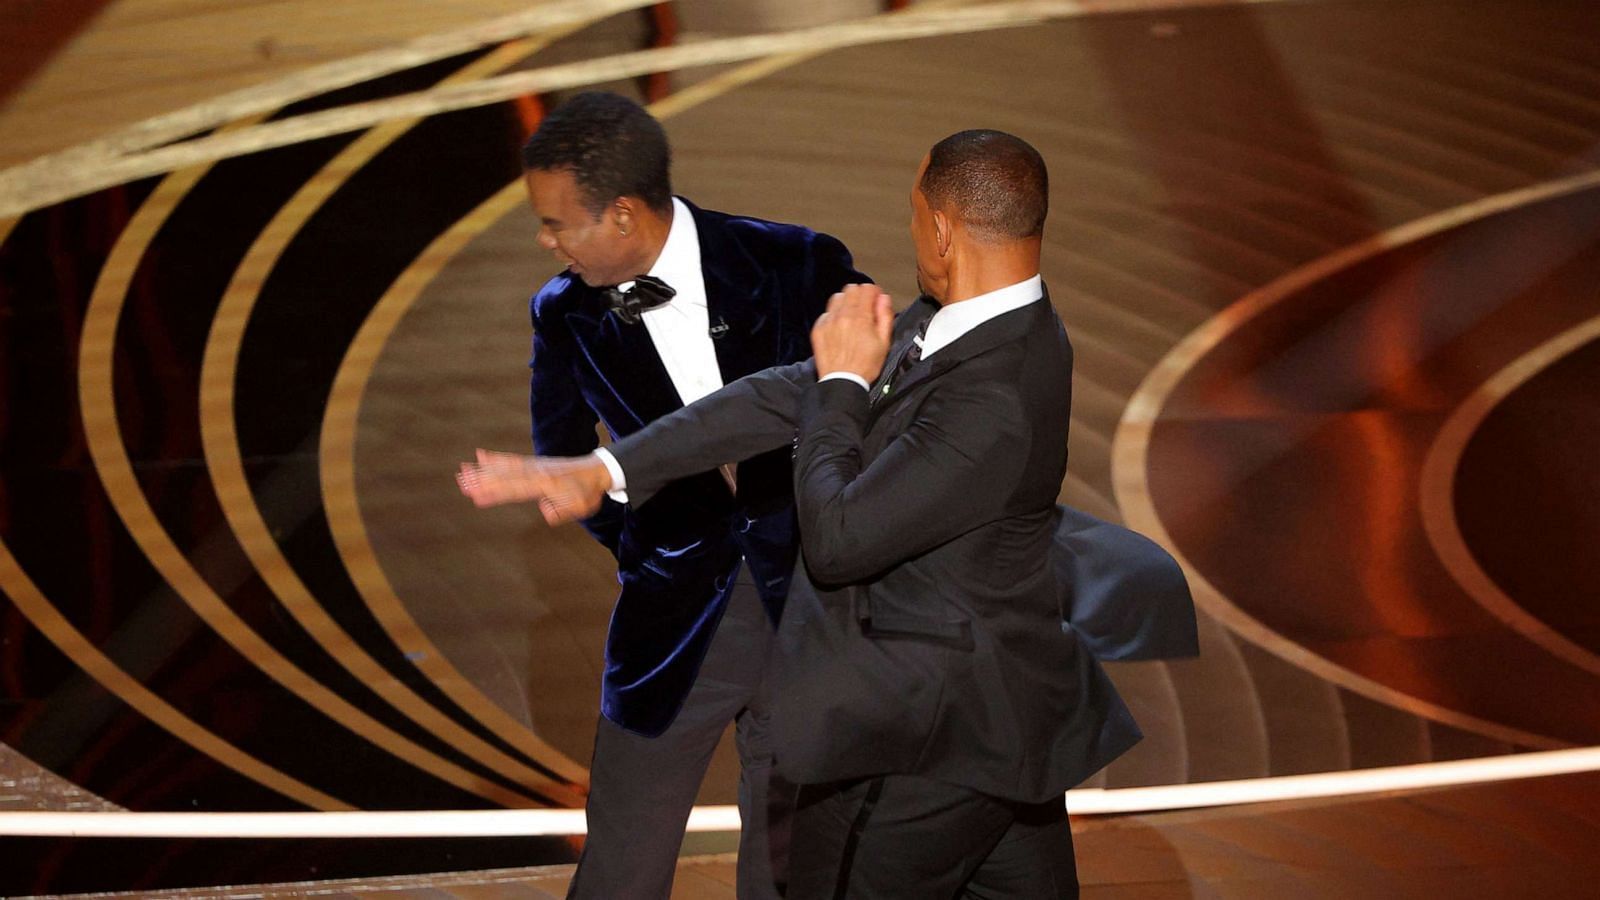 Will Smith slapped comedian Chris Rock at the 2022 Oscars